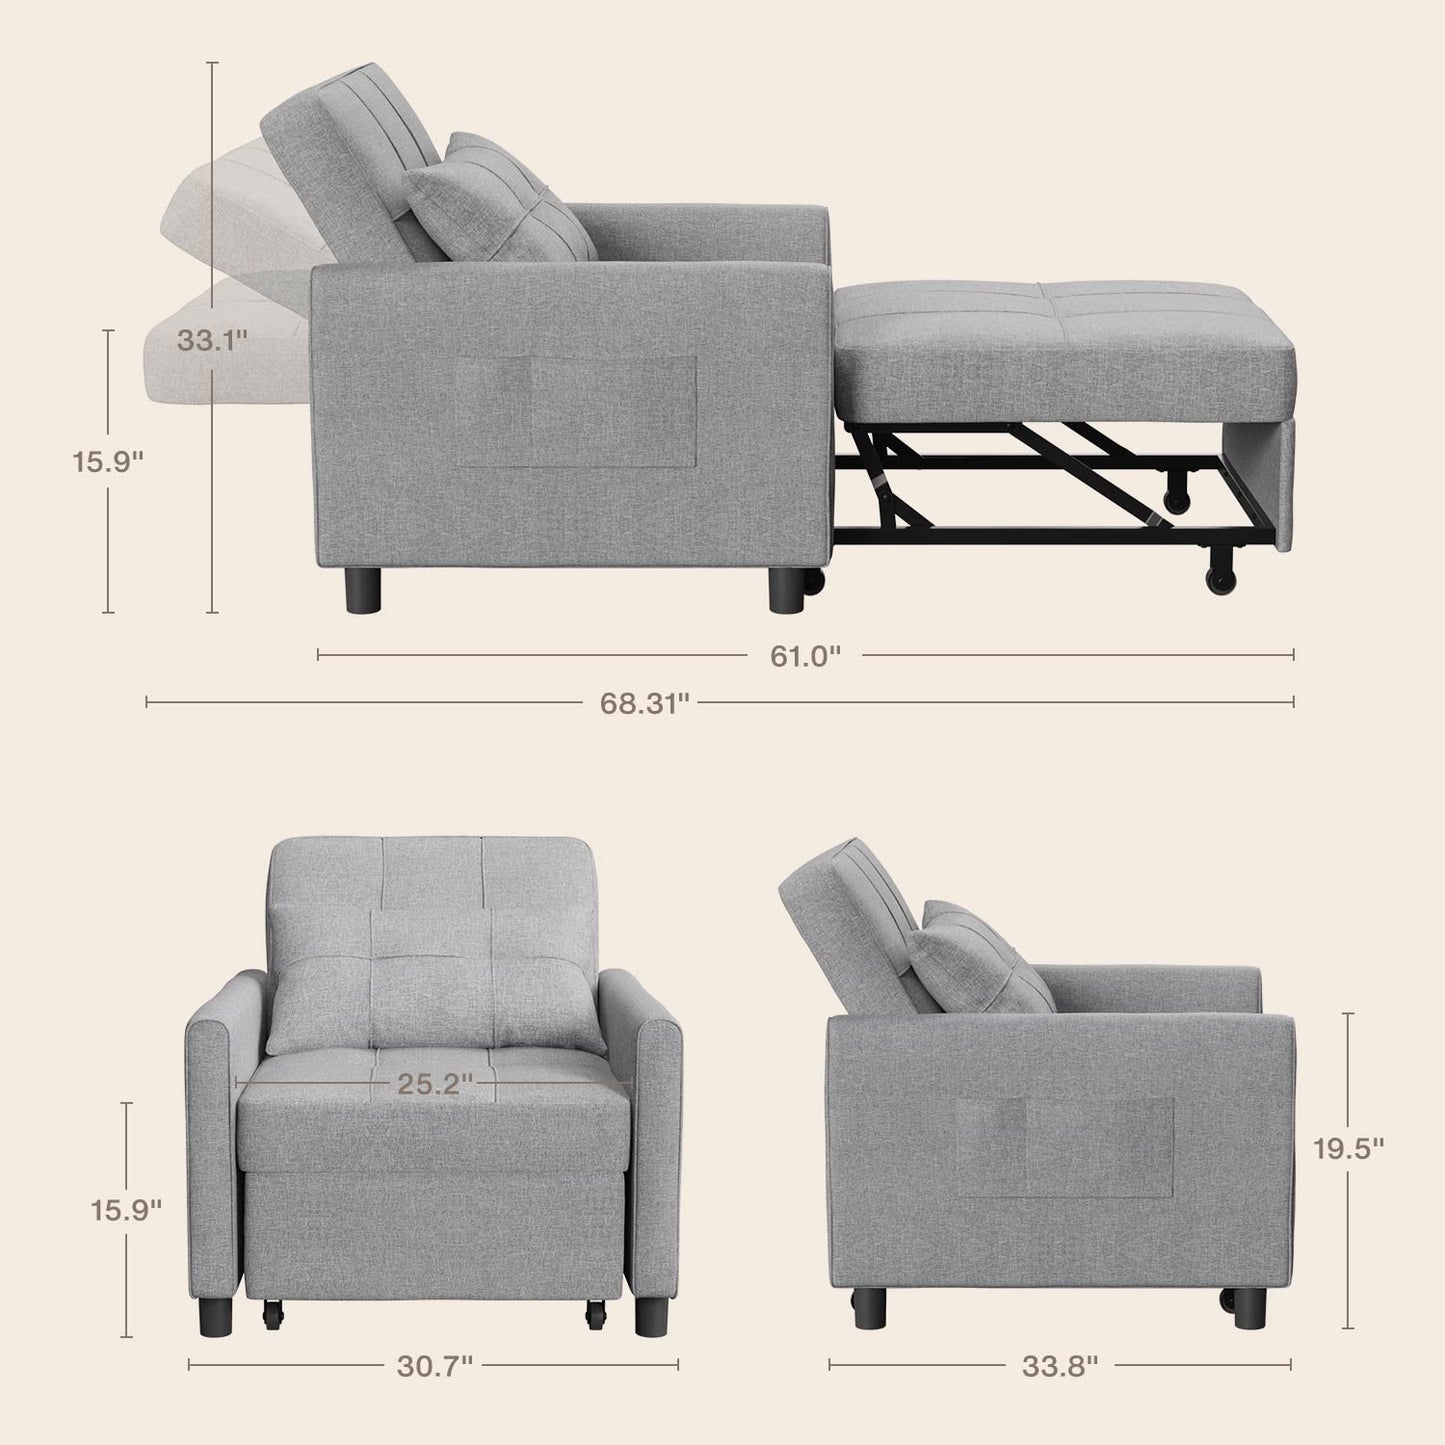 Noelse Sleeper Sofa Chair Bed, Convertible Sofa Chair 3-in-1, Adjustable Sleeper Chair Pullout Sofa Bed with Modern Linen Fabric for Living Room Apartment Small Space, Grey